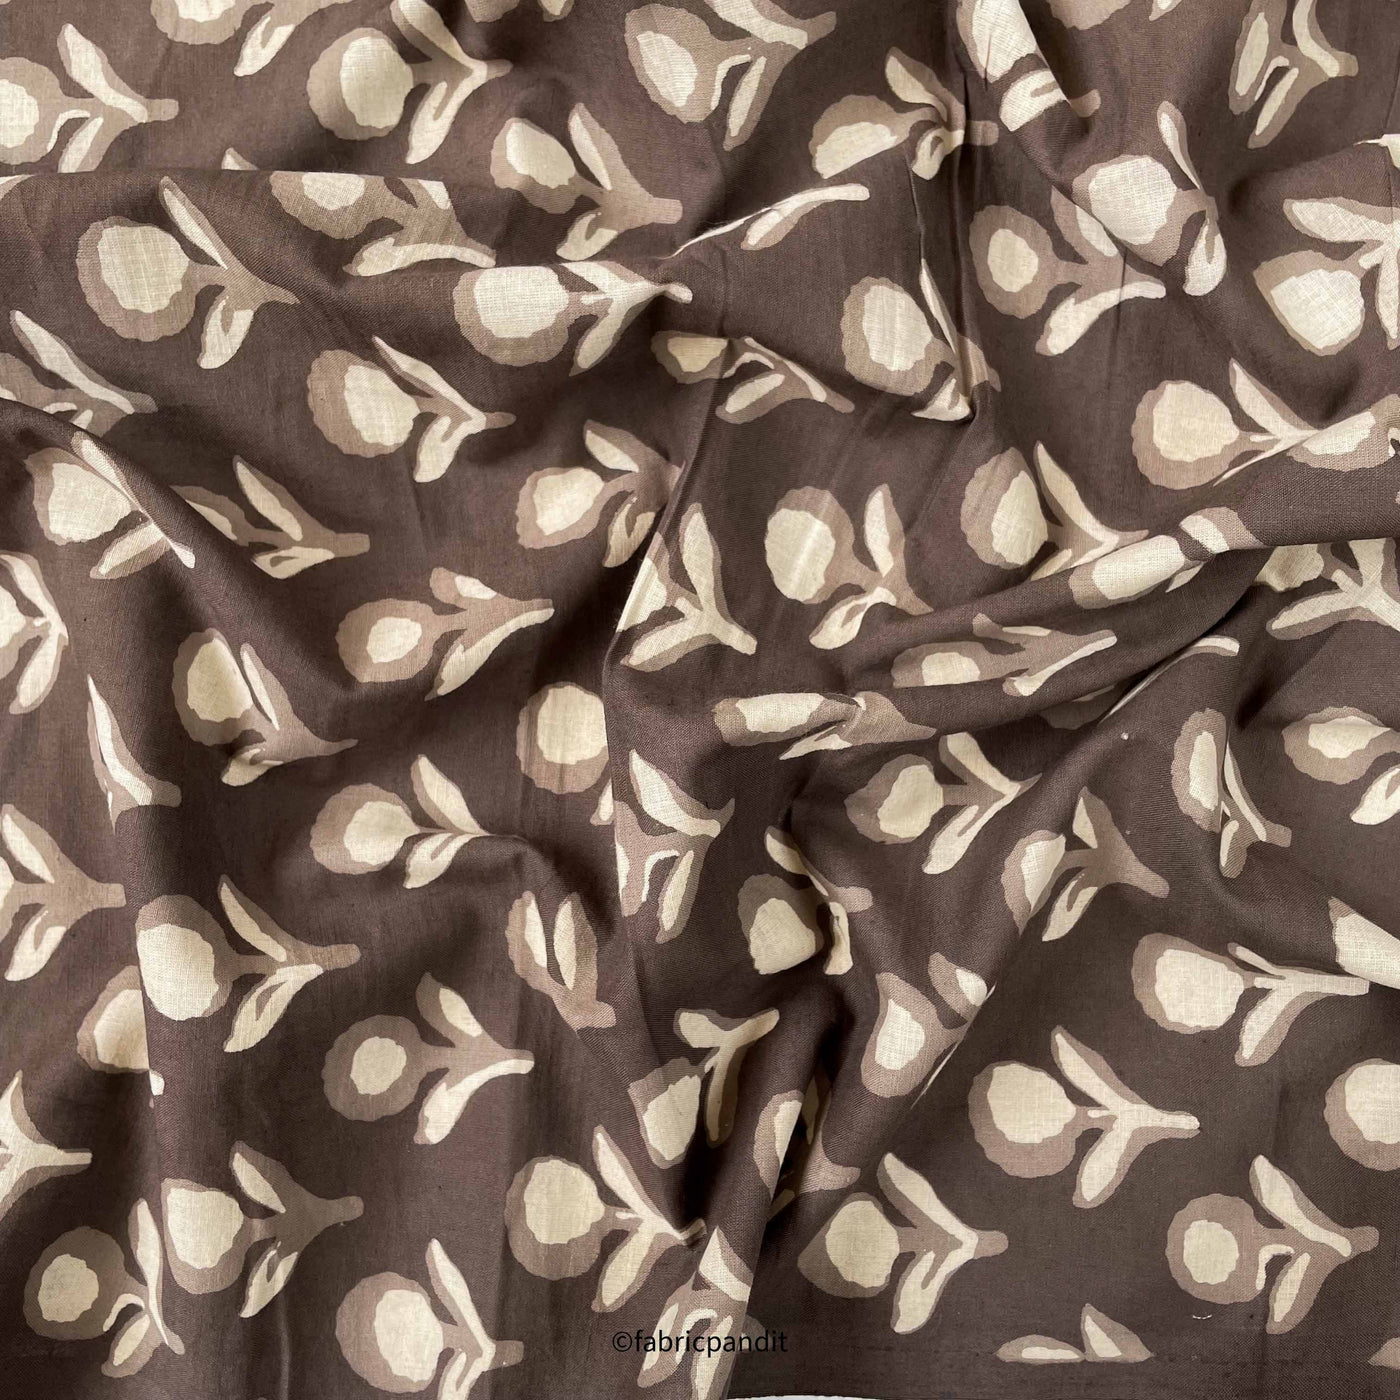 Fabric Pandit Fabric Brown Indigo Dabu Natural Dyed Abstract Roses Hand Block Printed Pure Cotton Modal Fabric (Width 42 inches)